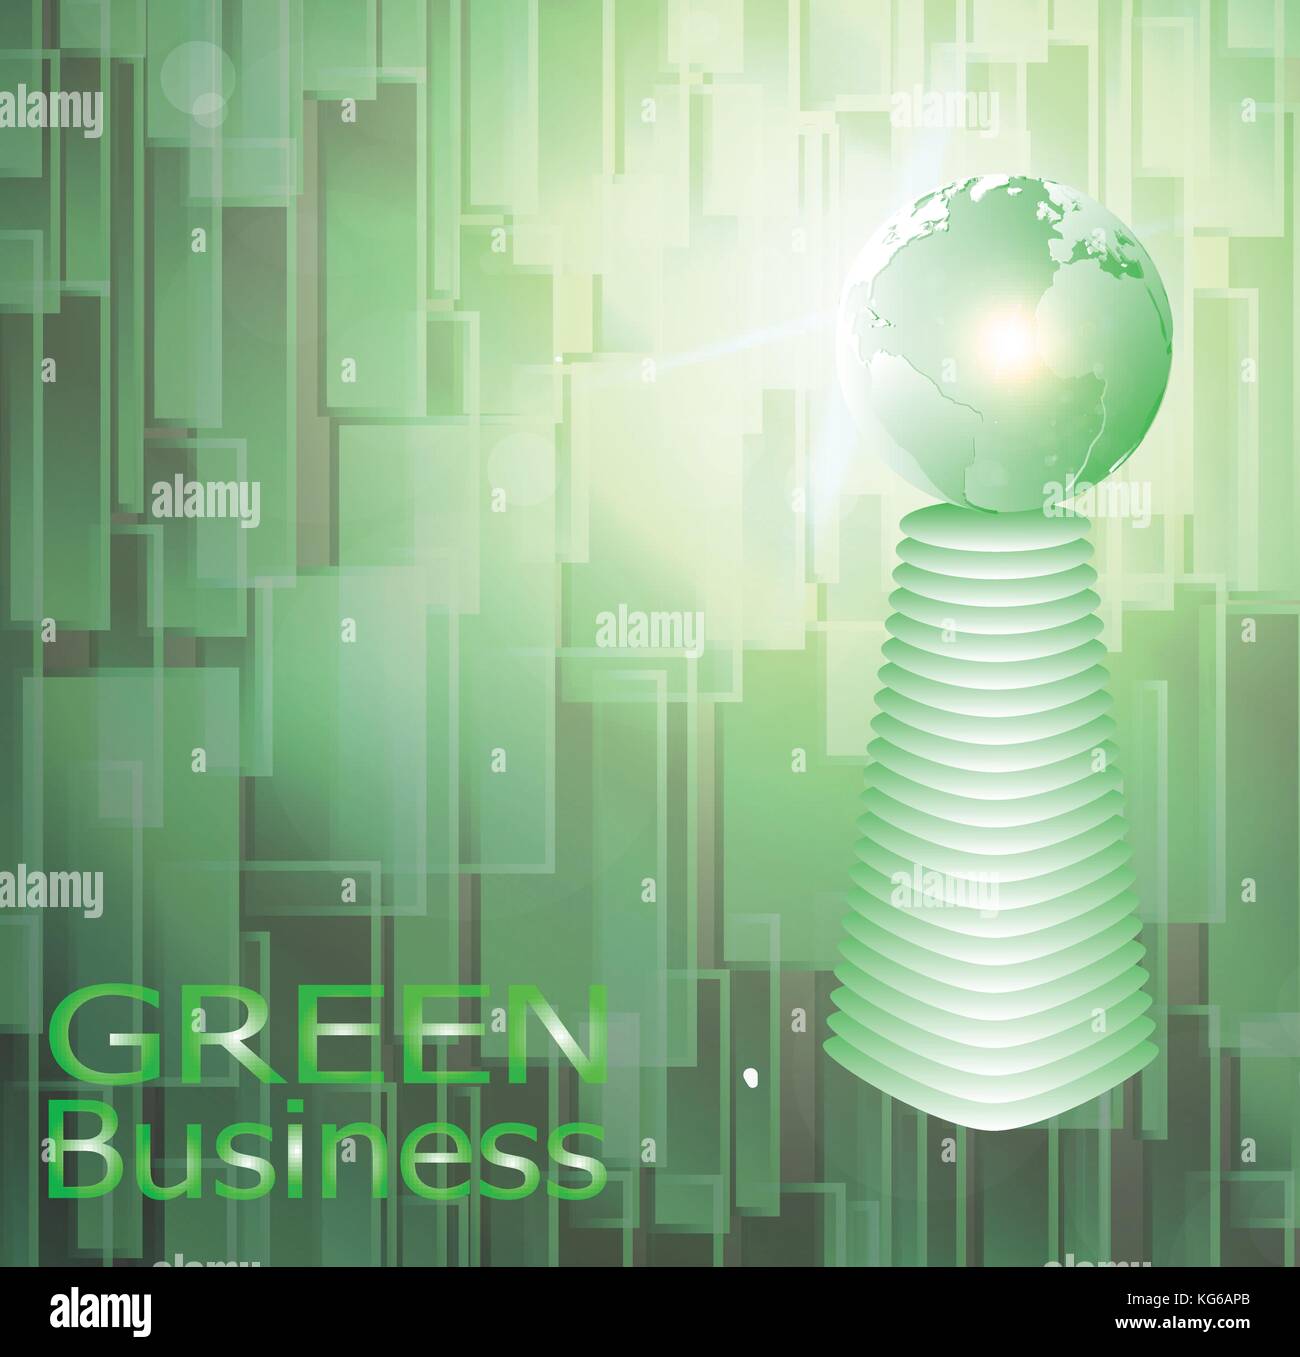 green business background vector. it can be applied for kinds of media presentation such as background,backdrop,illustration,poster,printing or others Stock Vector